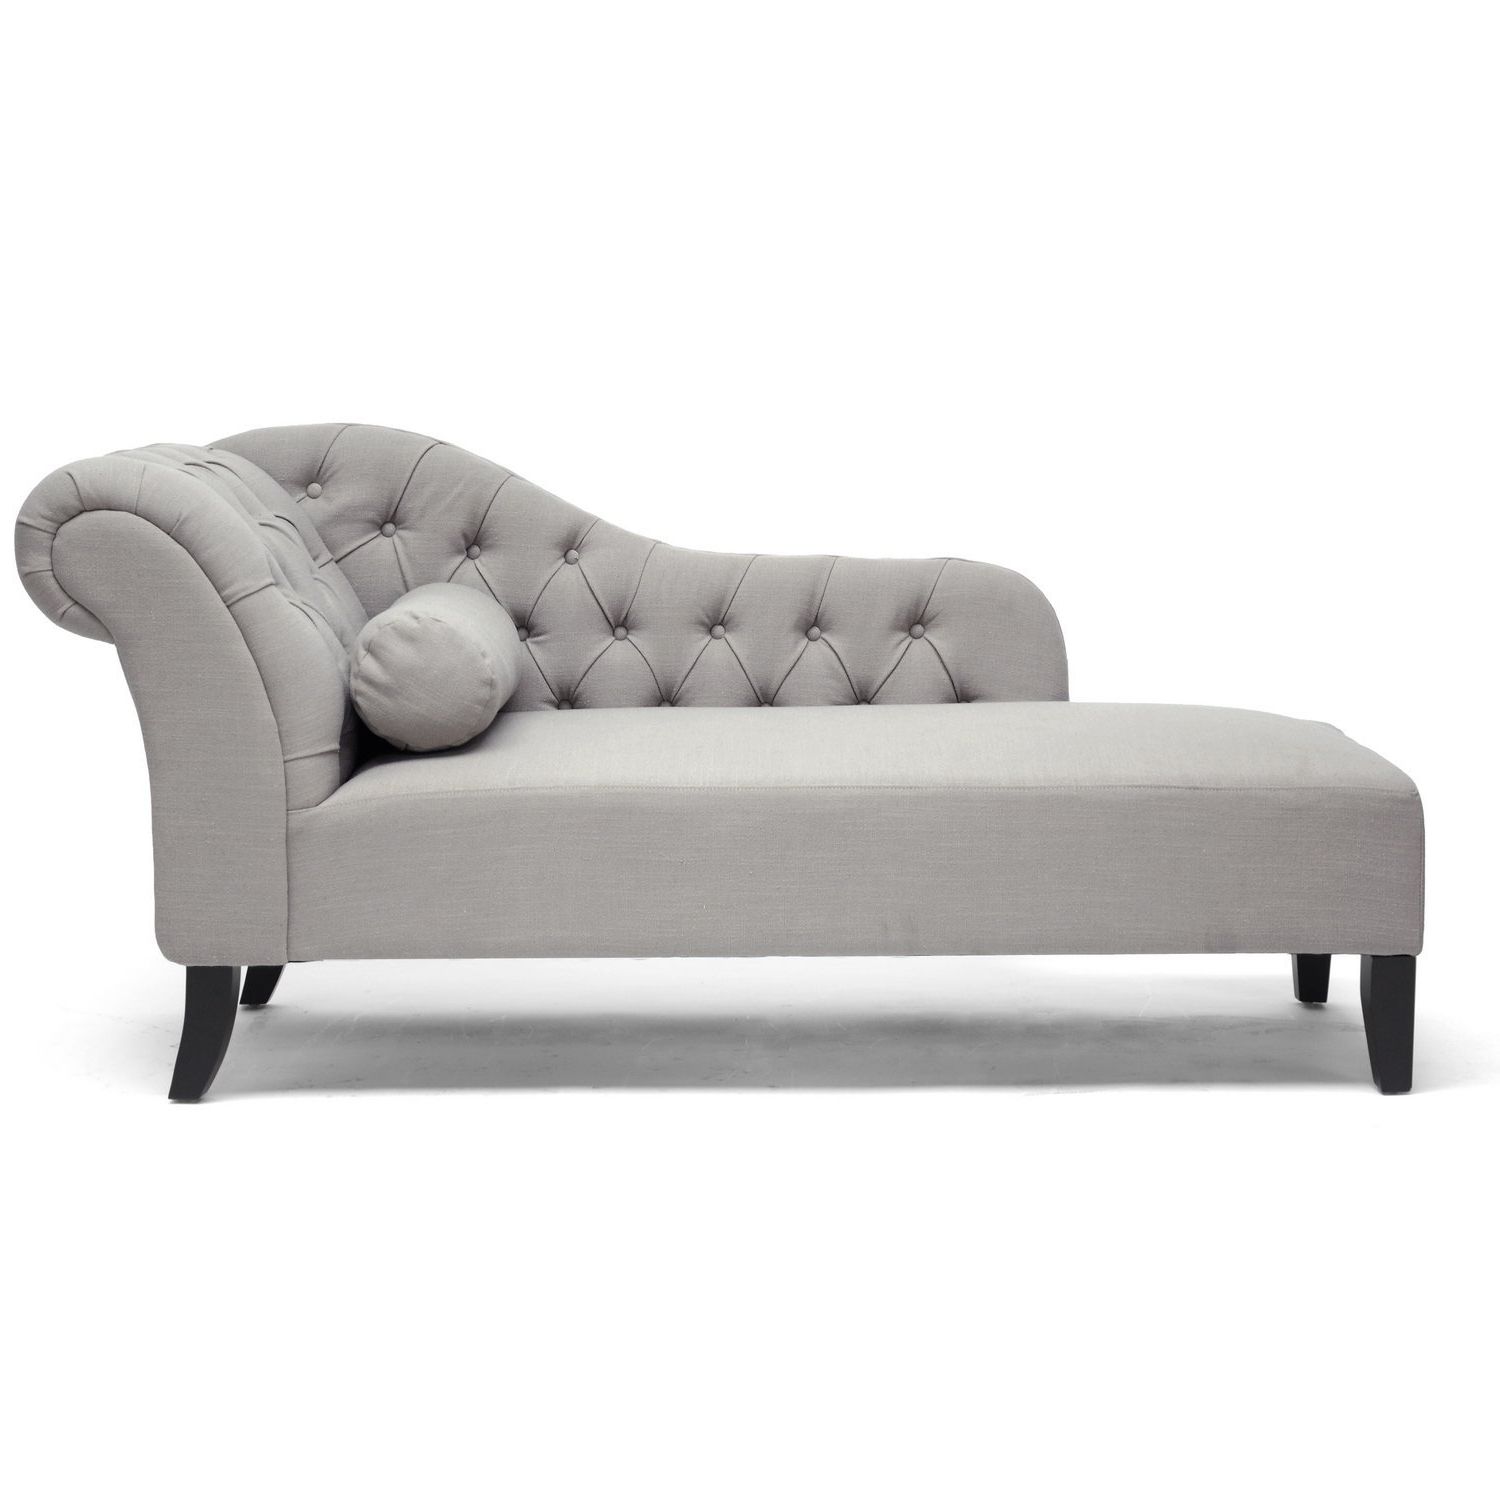 Well Liked Grey Chaises With Regard To Amazon: Baxton Studio Aphrodite Tufted Putty Linen Modern (View 10 of 15)